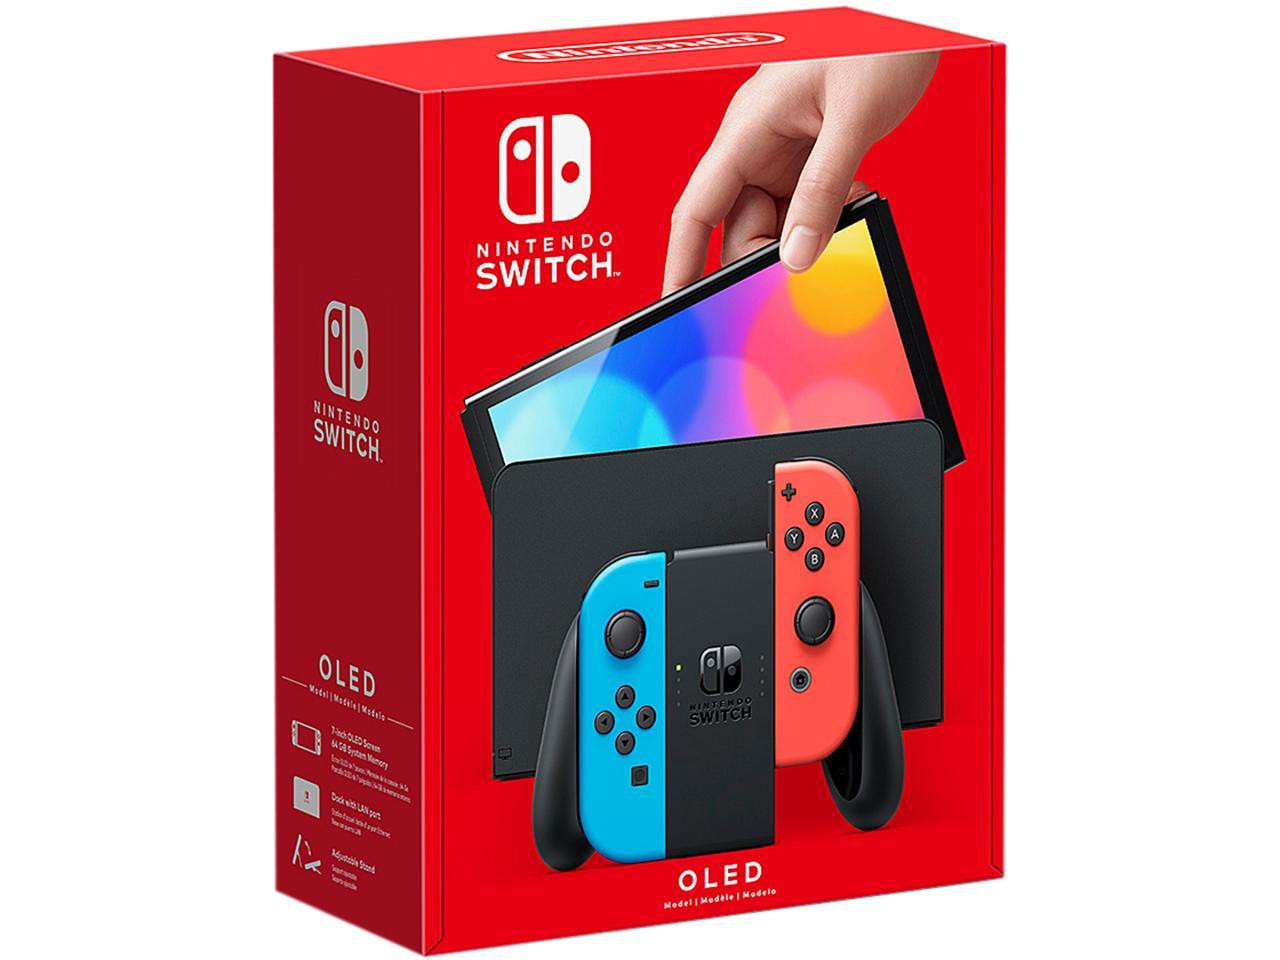 Nintendo Switch - OLED model with Neon Red and Neon Blue Joy-Con